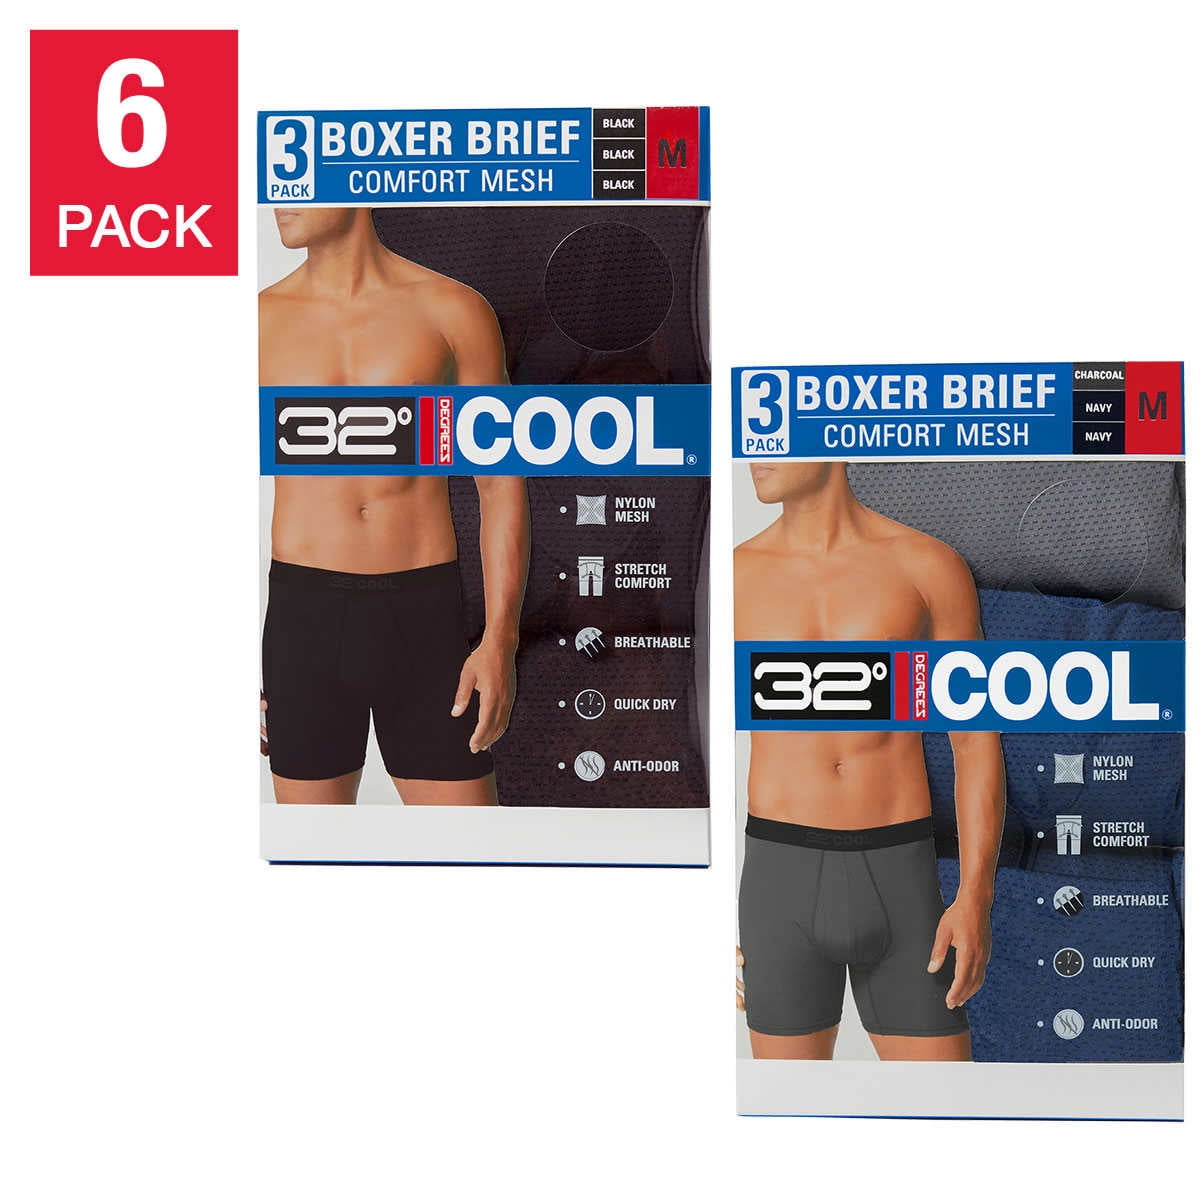 Hanes ComfortSoft Men's Boxers Pack, Moisture-Wicking Cotton Jersey, 6-Pack